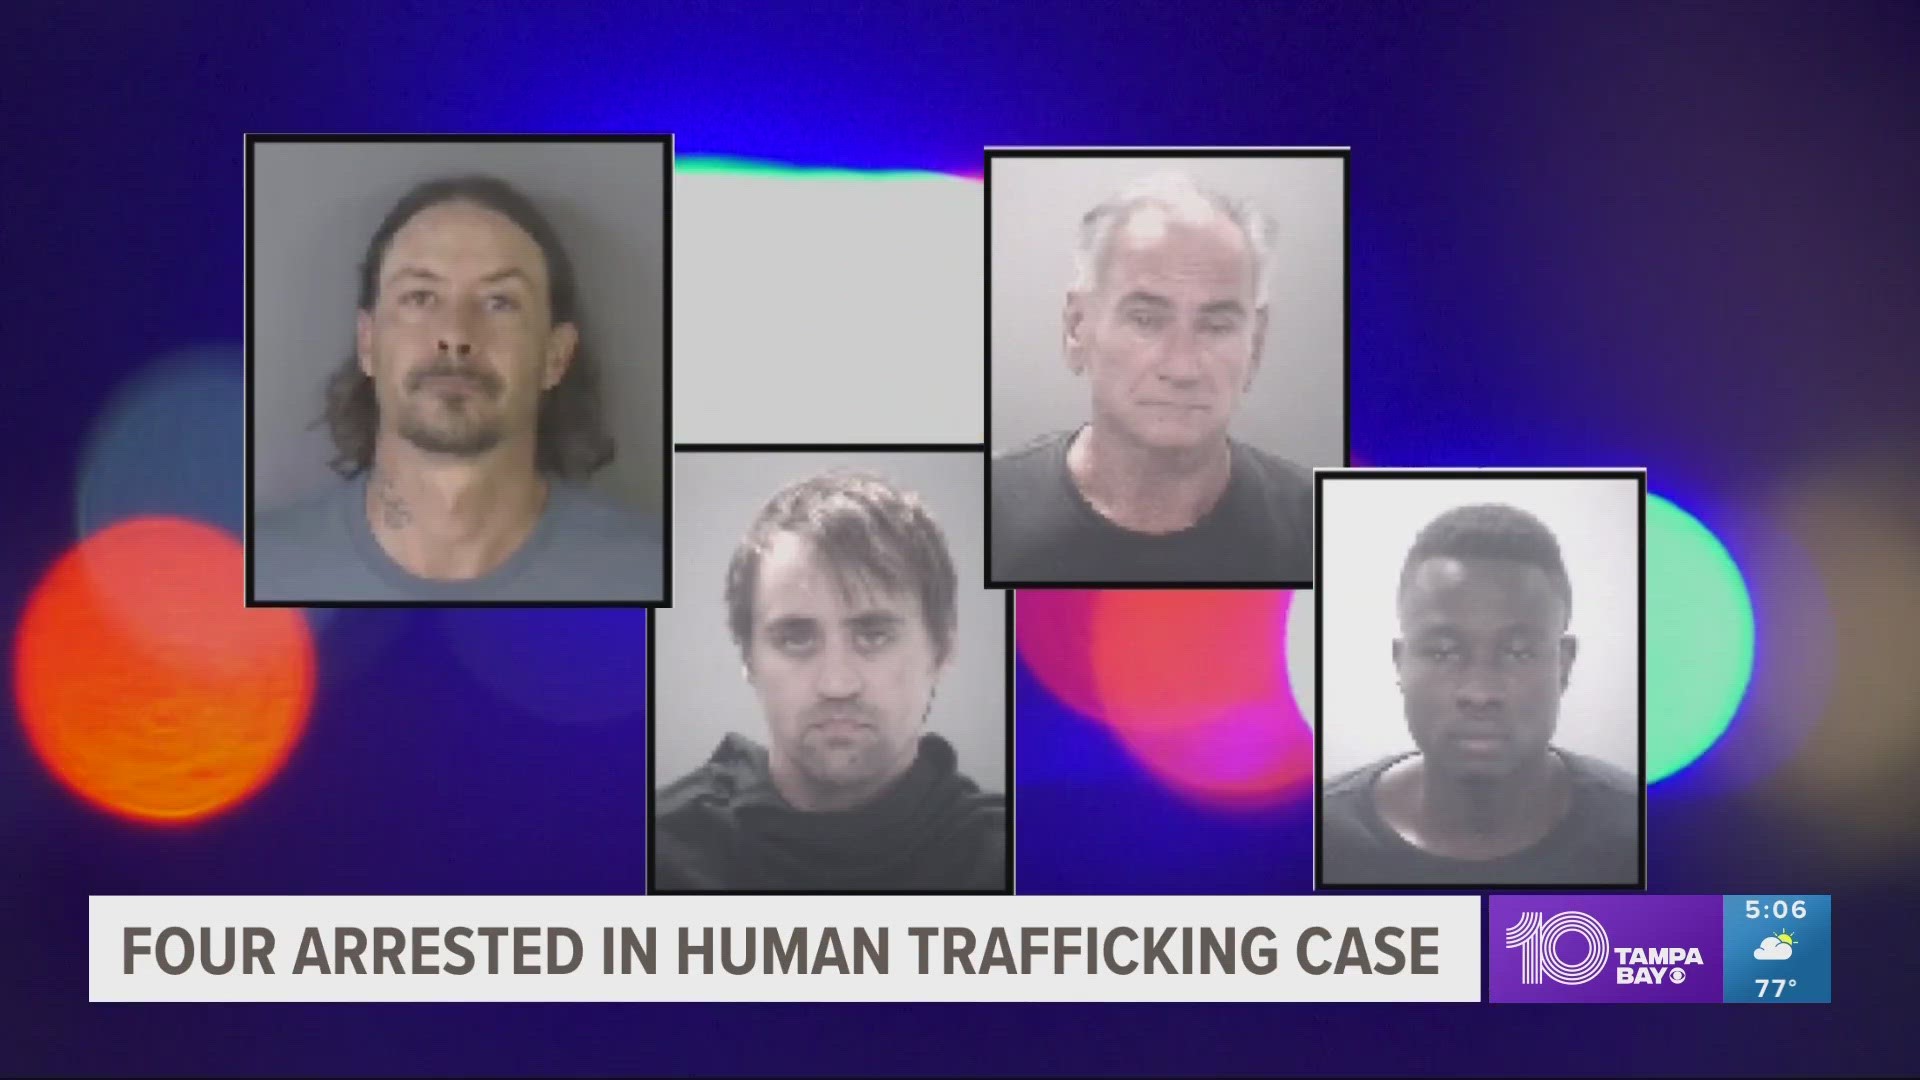 All four men involved in this case were charged with several crimes – including human trafficking, use of a child in sexual performance and more.